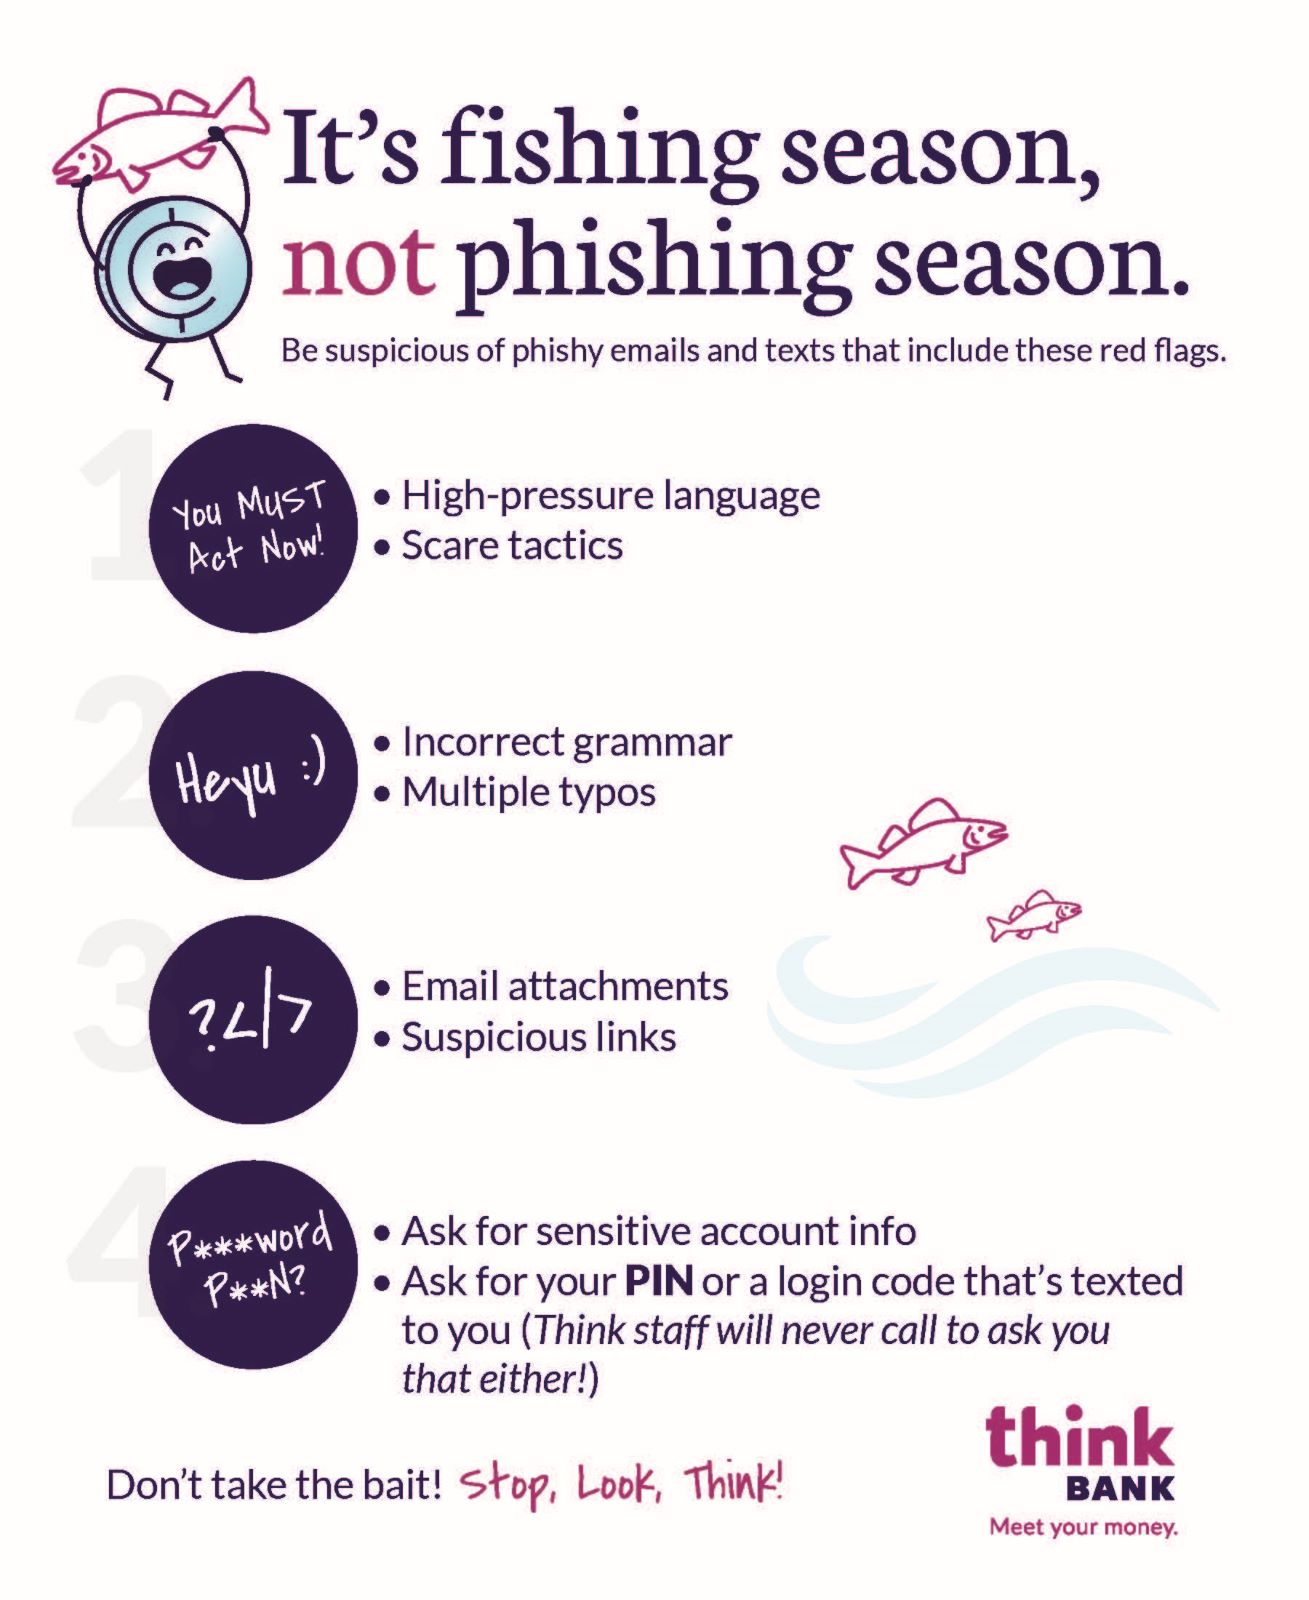 It's fishing season, not phising season. Be suspicious of phishy emails and texts that include red flags. 